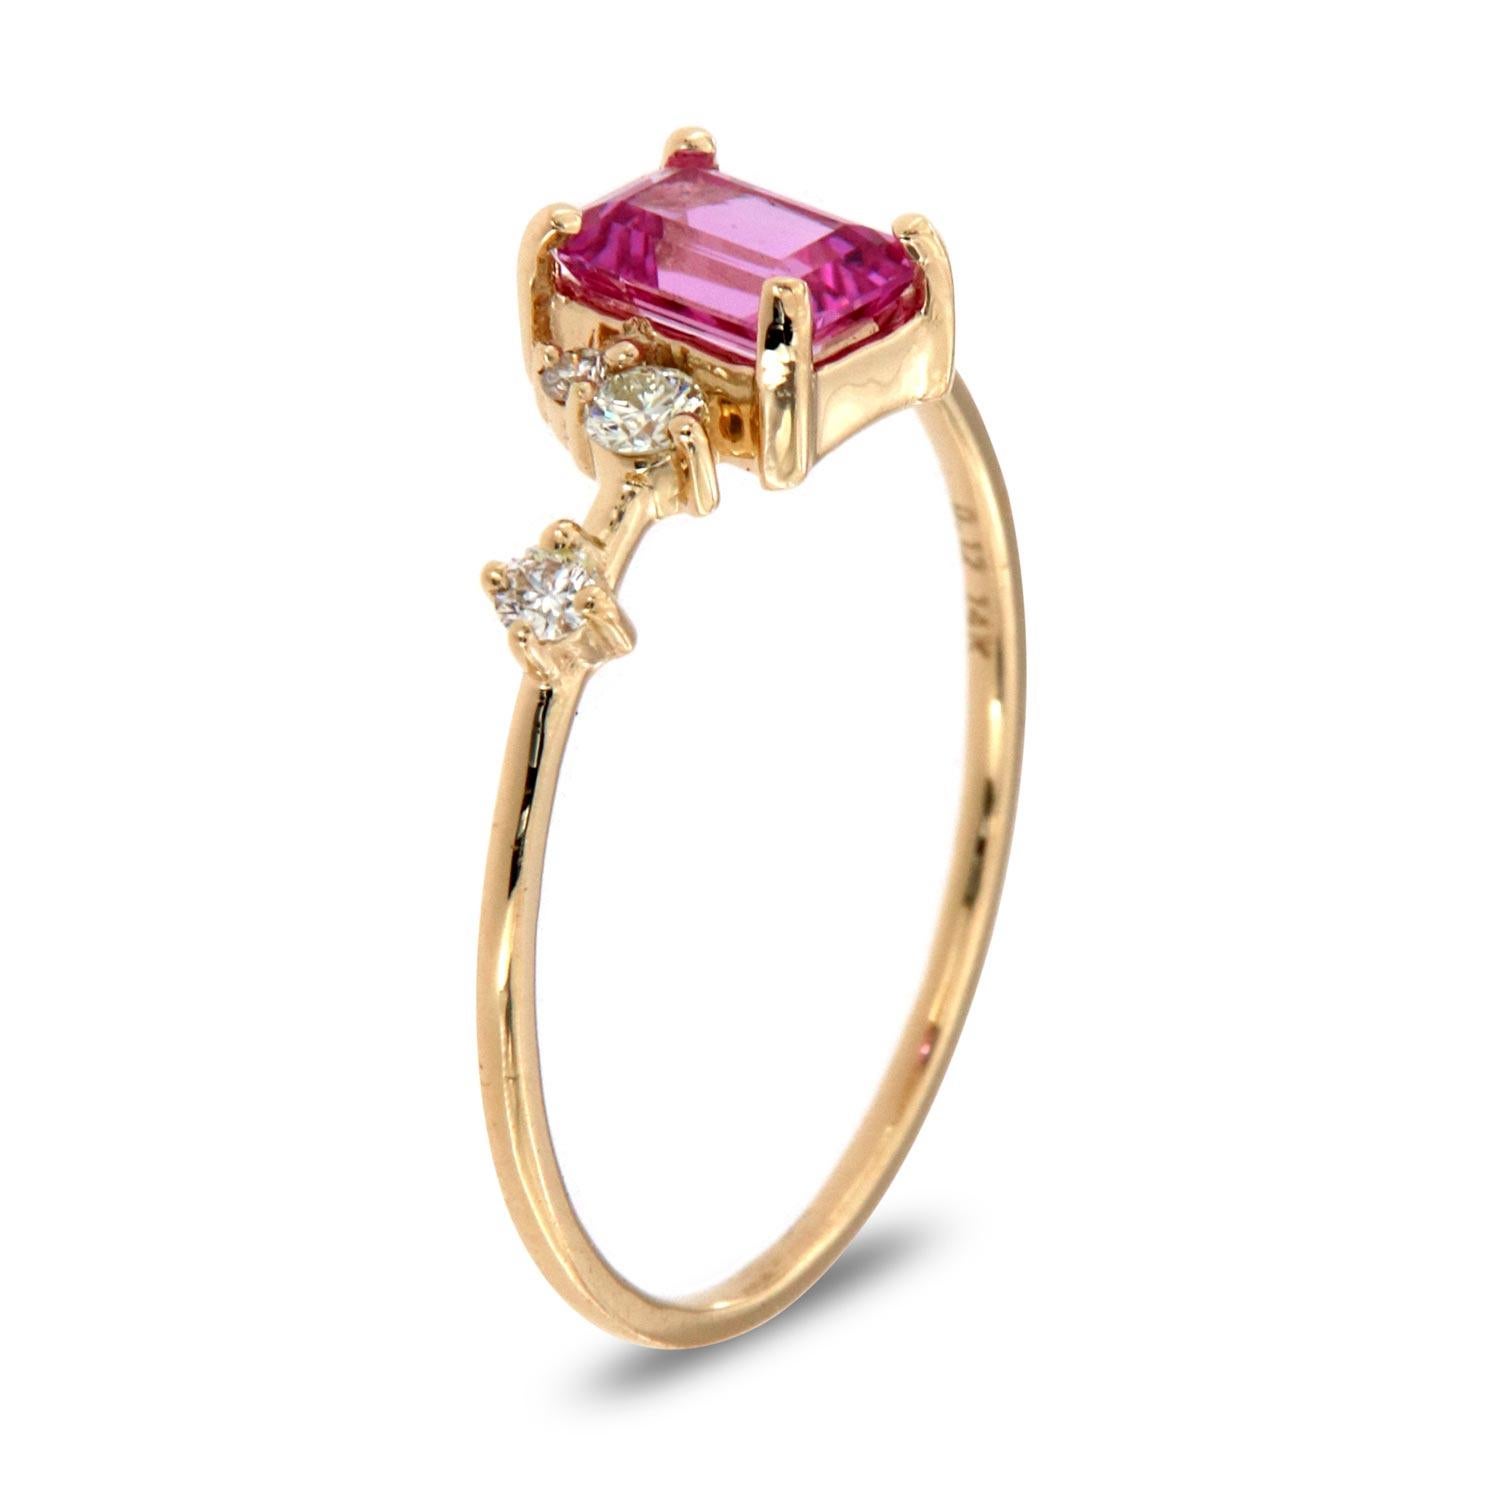 This petite organic designed ring is impressive in its vintage appeal, featuring a natural pink emerald shape sapphire, accented with scattered round brilliant diamonds. Experience the difference in person!

Product details: 

Center Gemstone Type: